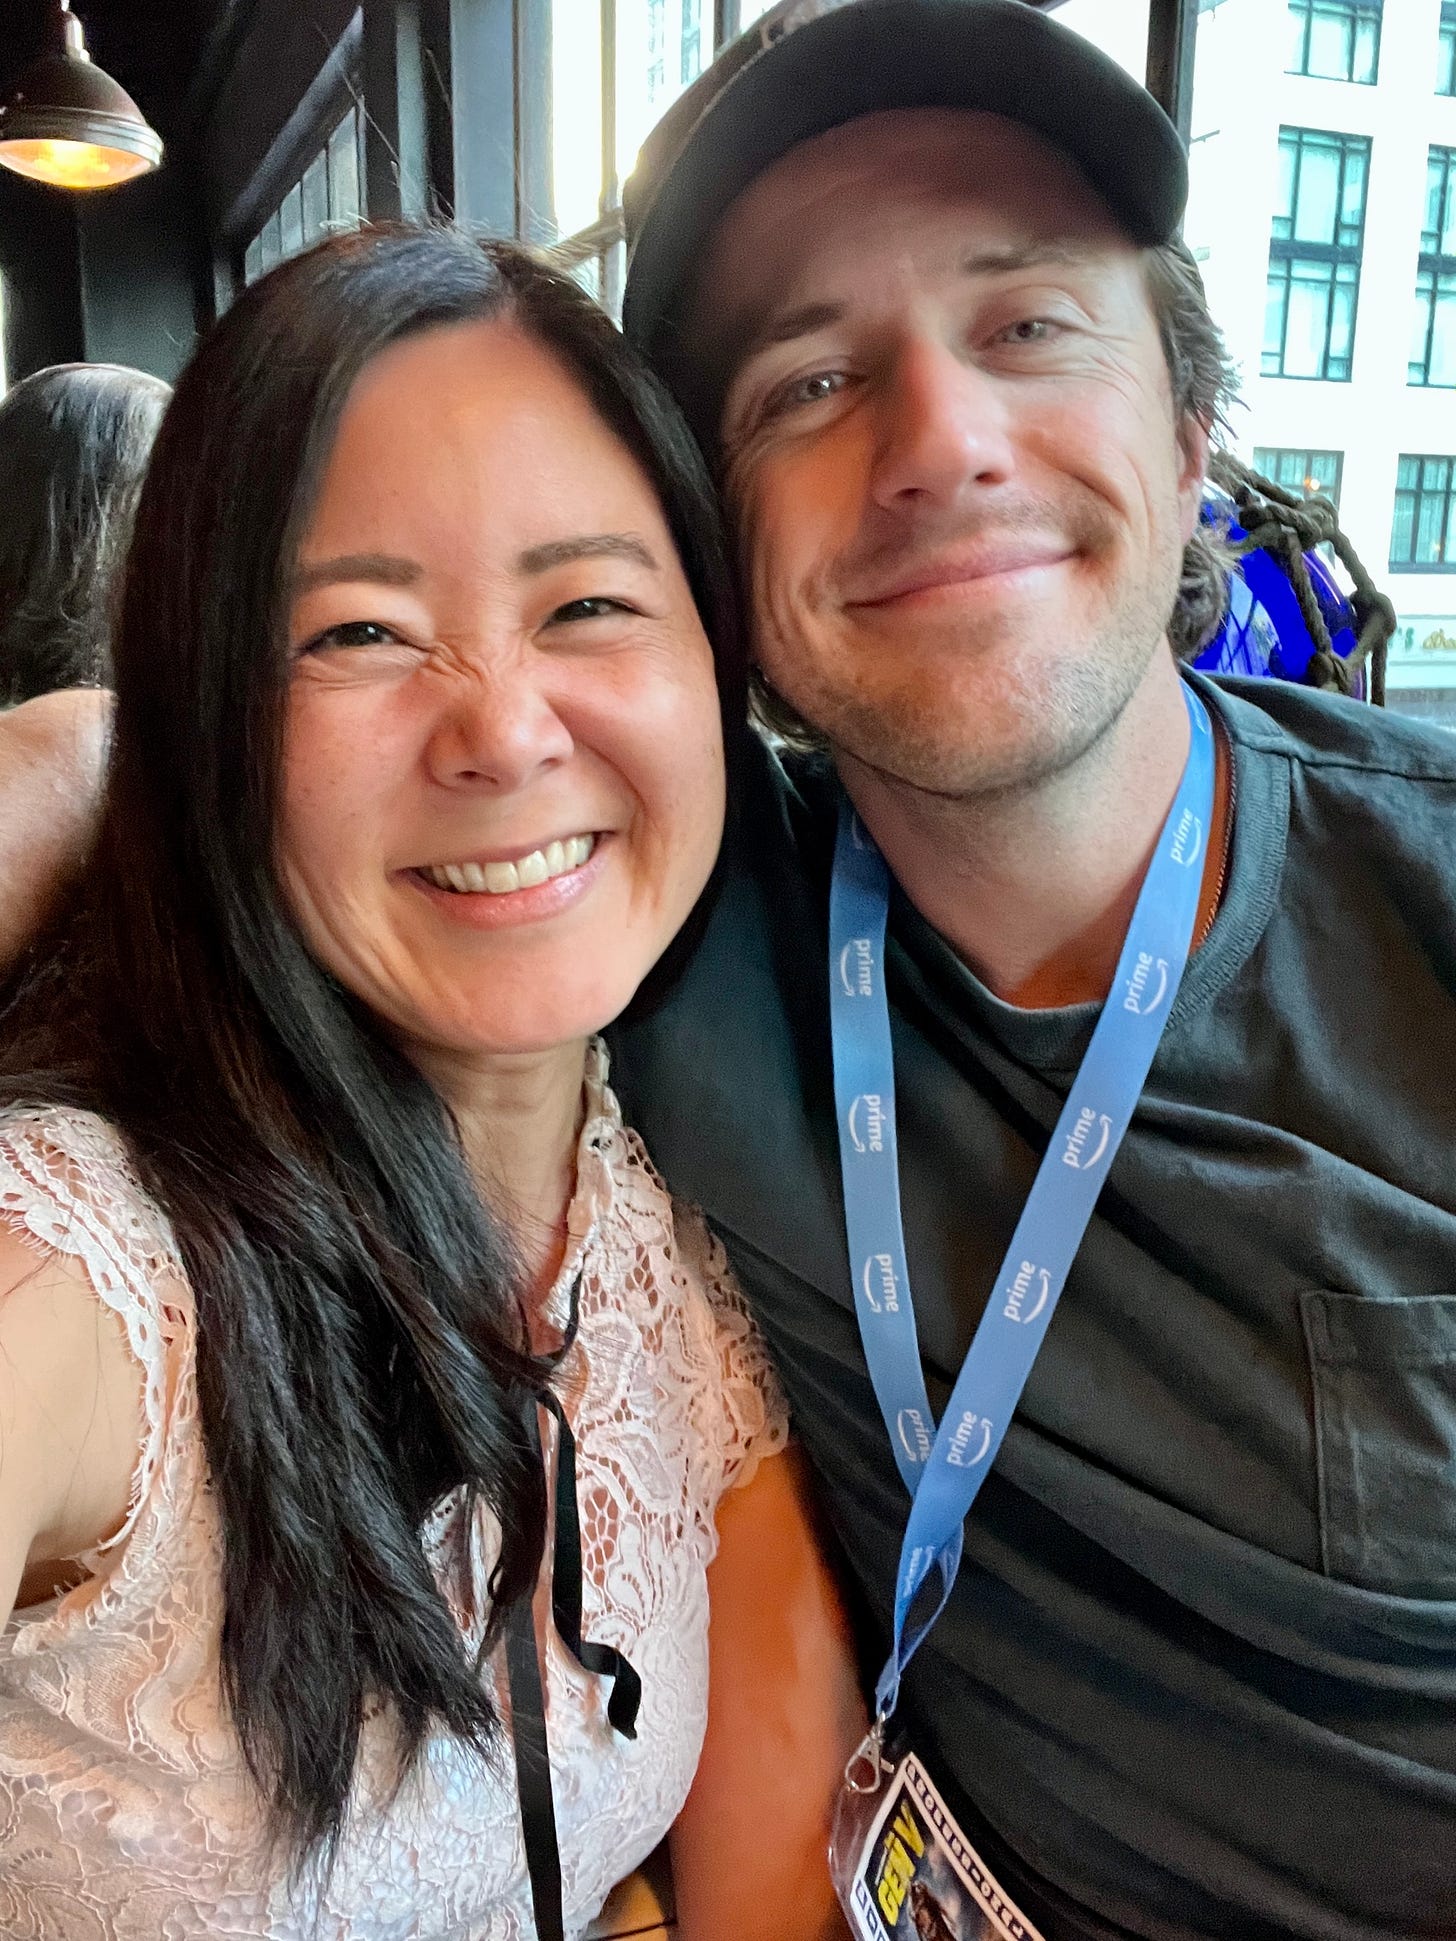 Evelyn Skye and Pierce Brown at San Diego Comic Con